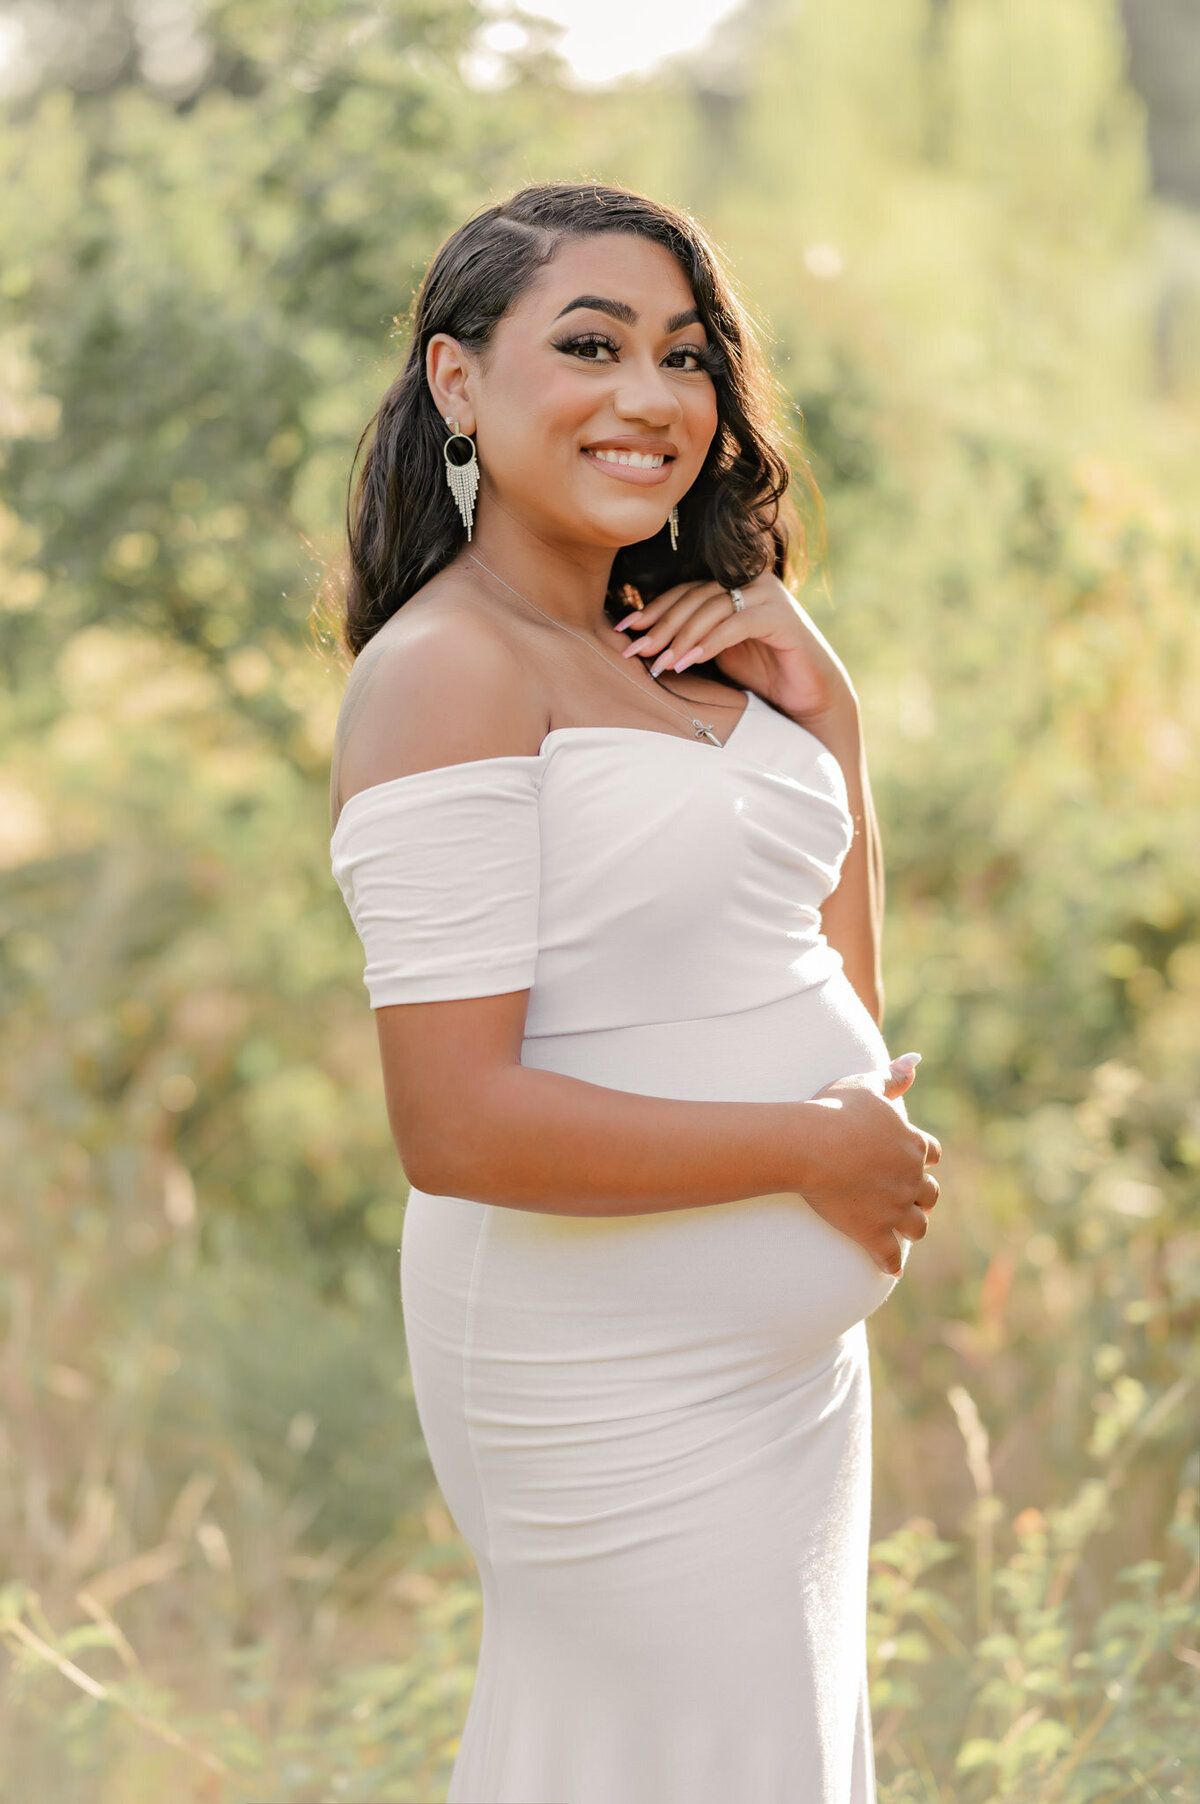 Beauitful glowing portrait of a pregnant woman in a white gown smiling at the camera.